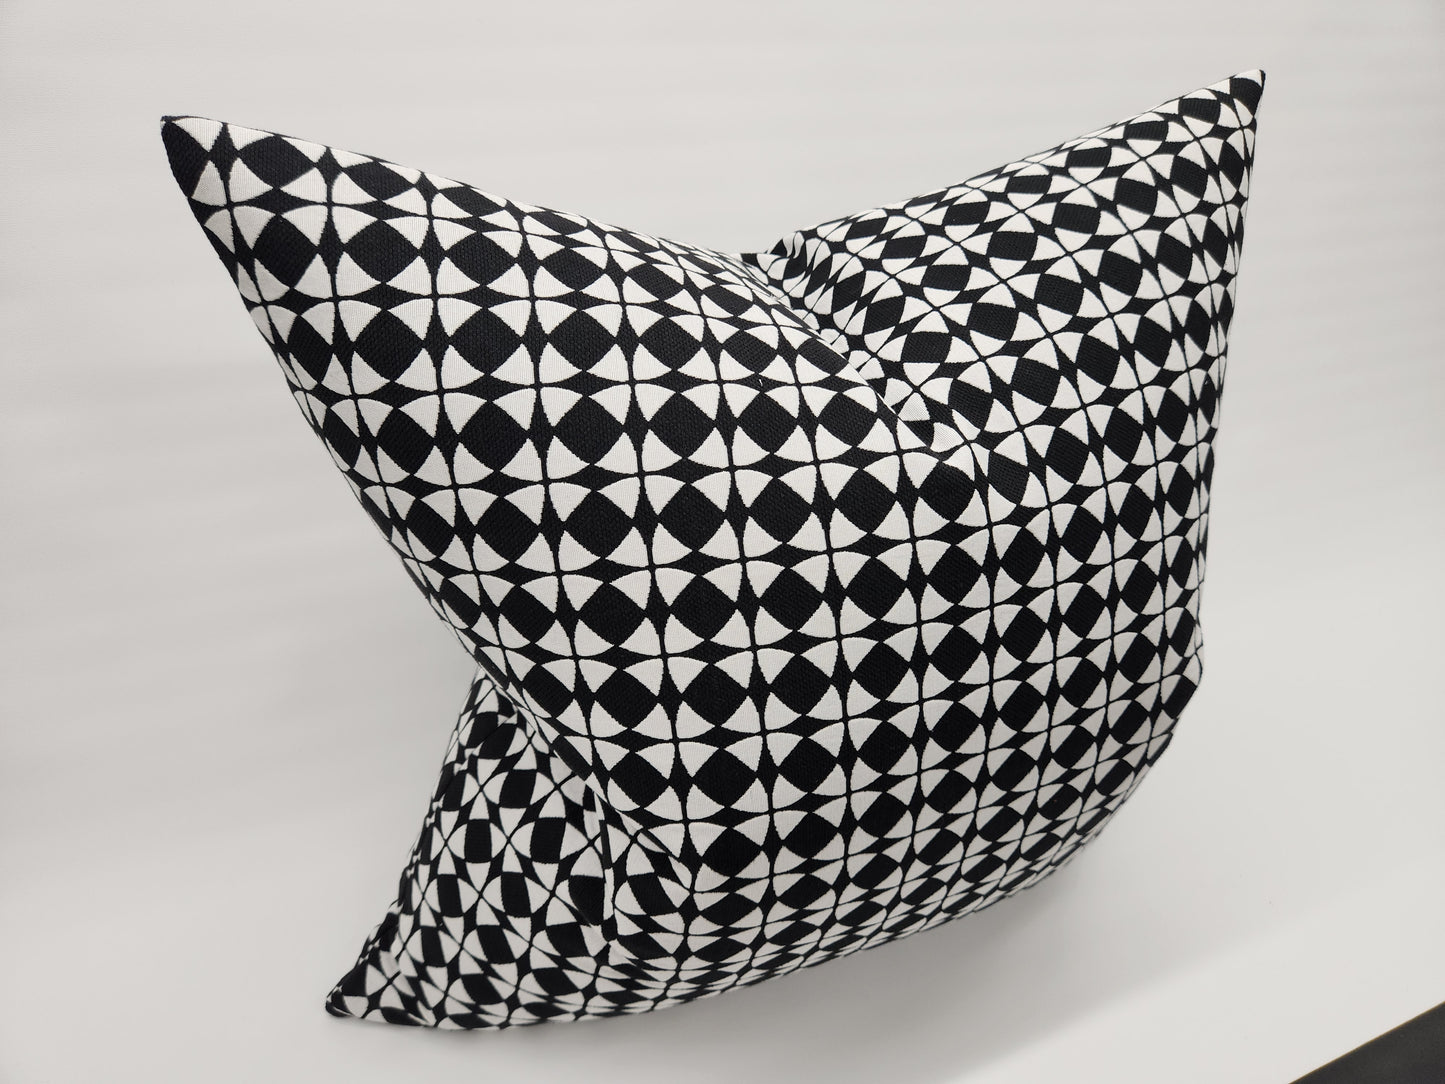 Explorer58 Square Pillow Cover, Deep Space Black, Various Sizes, with or without Inserts, Handmade by Houston and Scott